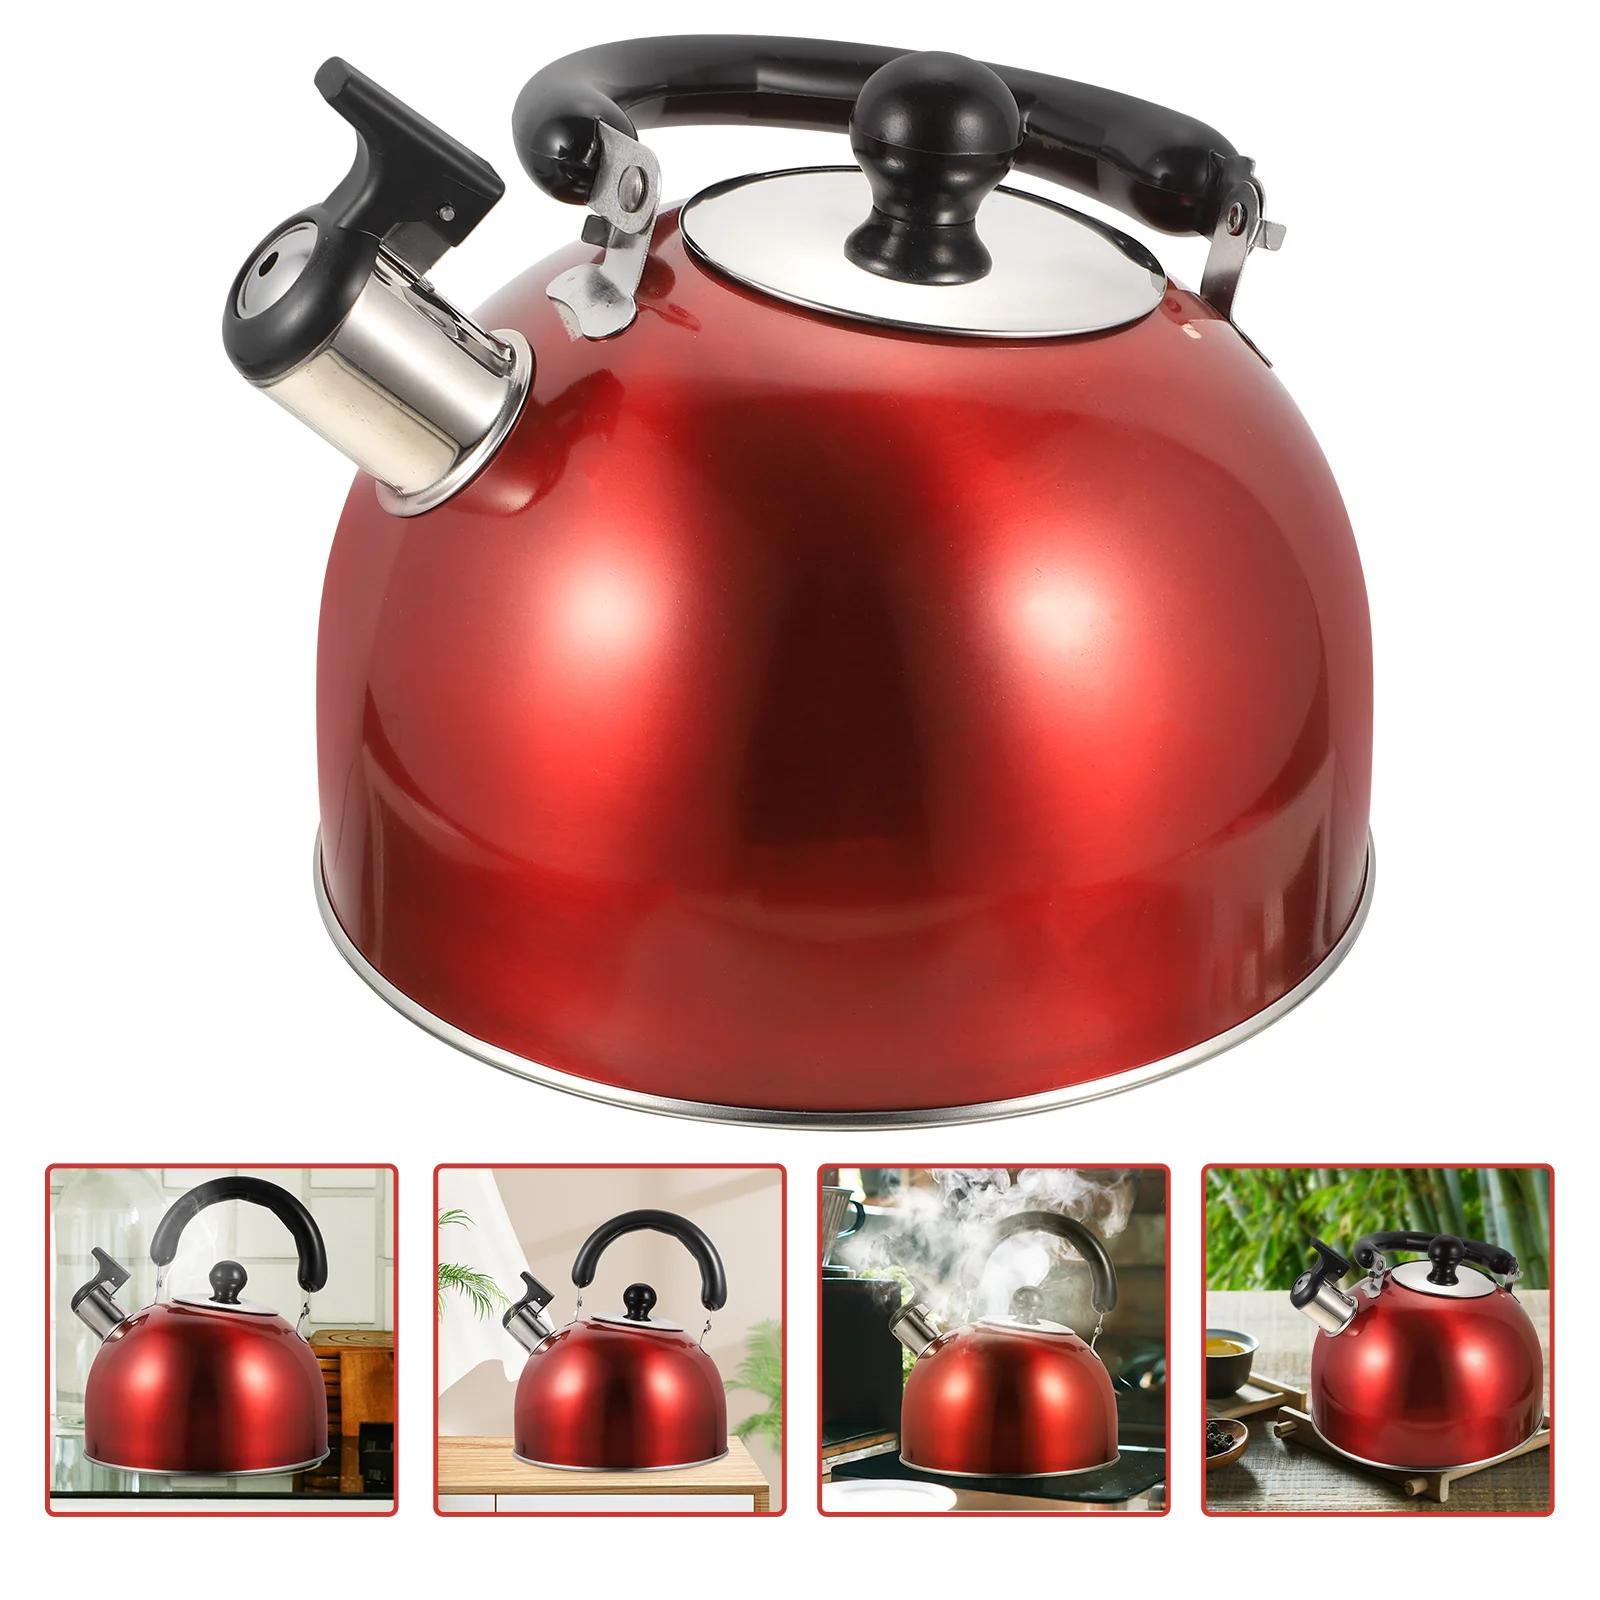 

Kettle Tea Whistling Water Stovetop Teapot Stainless Pot Steel Gas Stove Coffee Cooker Electric Hot Induction Teakettle Boiling